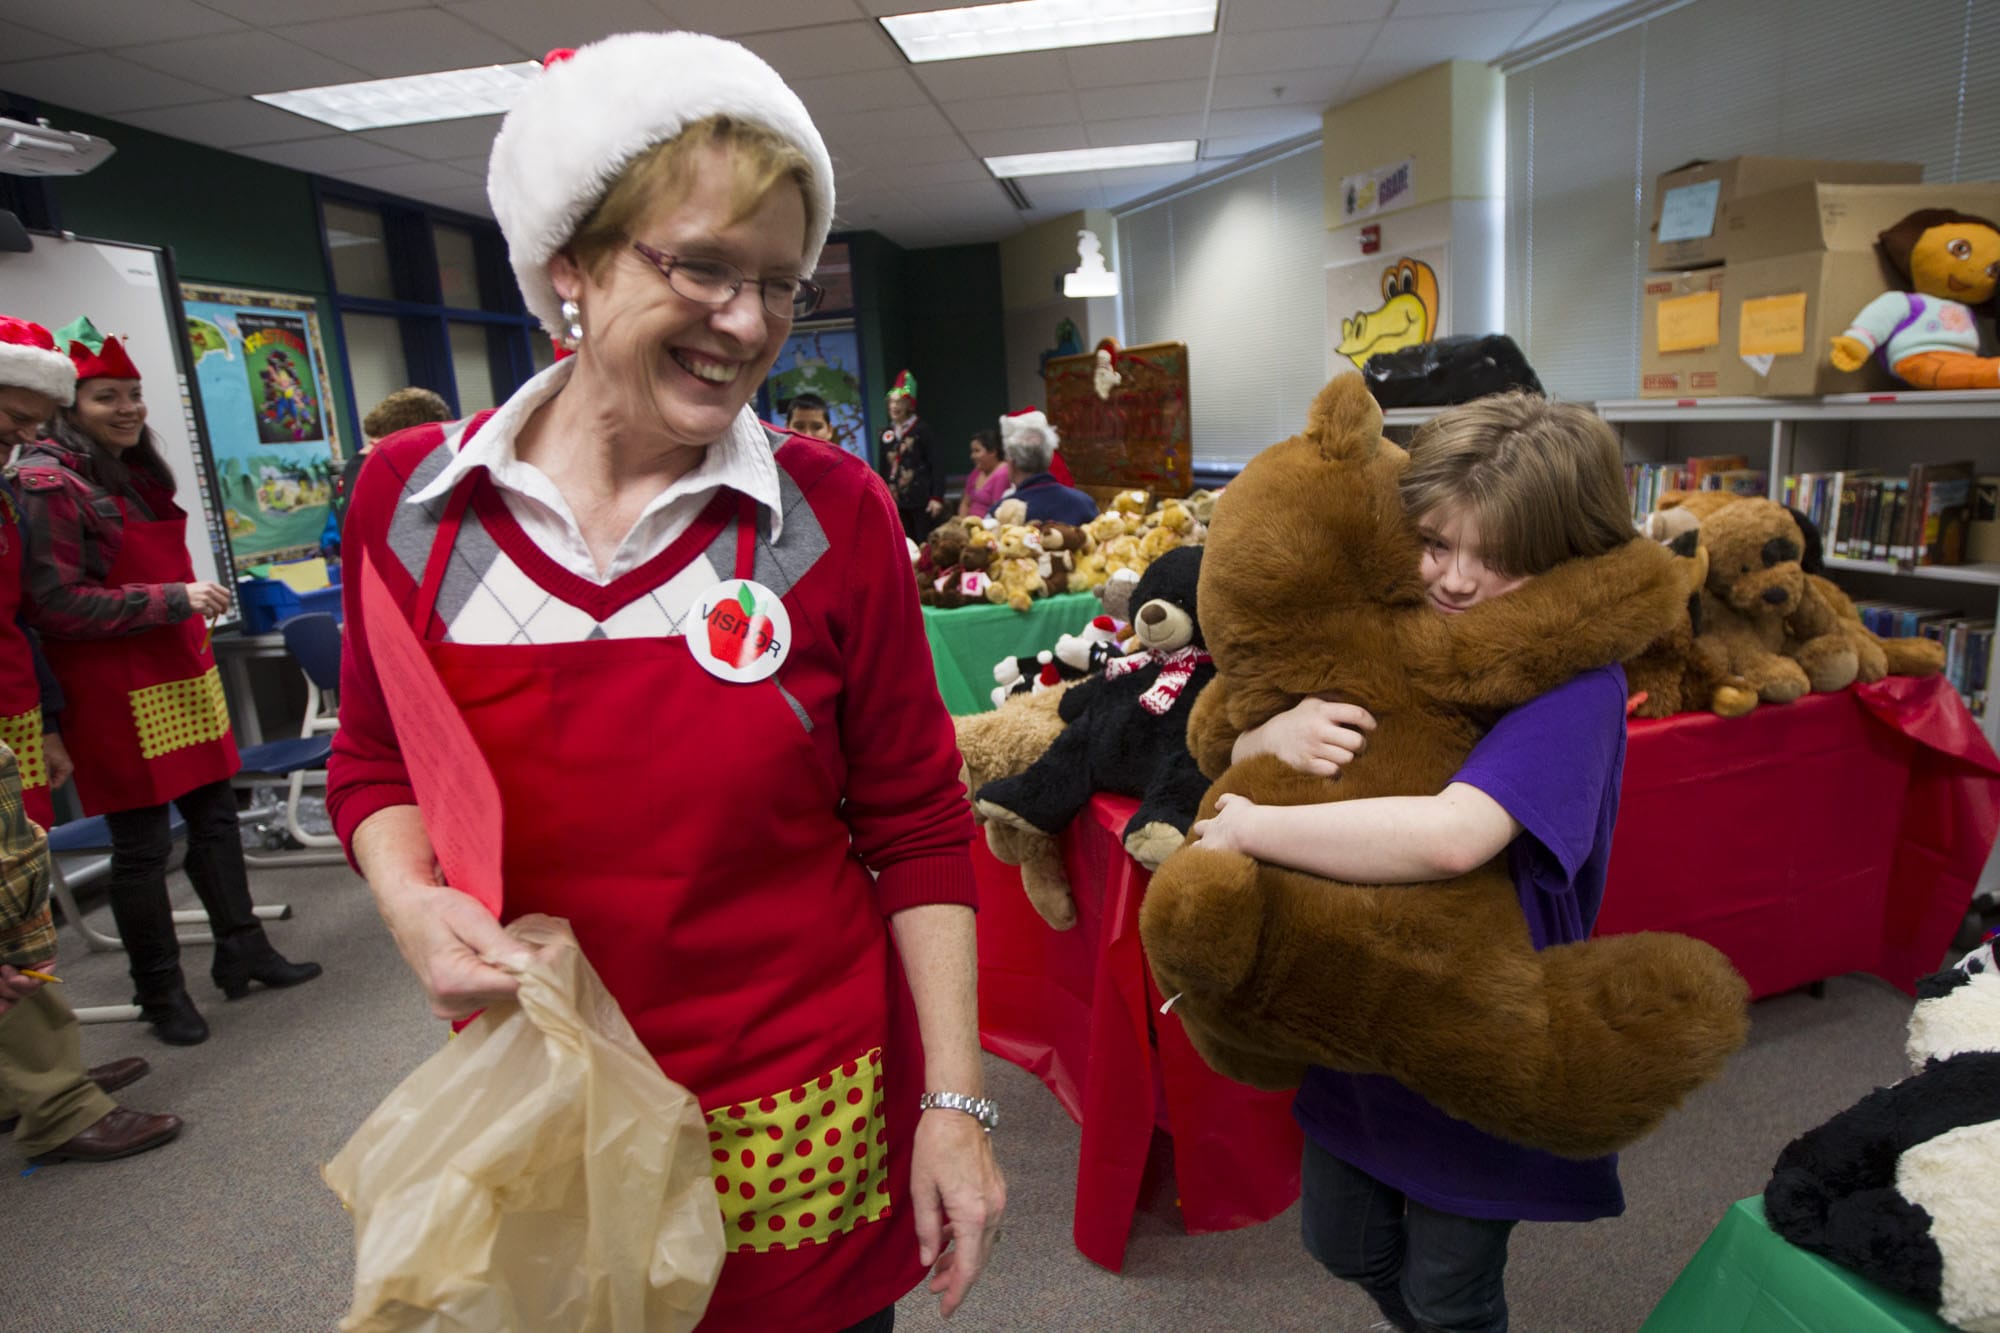 Fifth-grader Amy Shook hugs a stuffed bear as volunteer Renee Rhyasen helps her shop for gifts at Washington Elementary on Thursday.